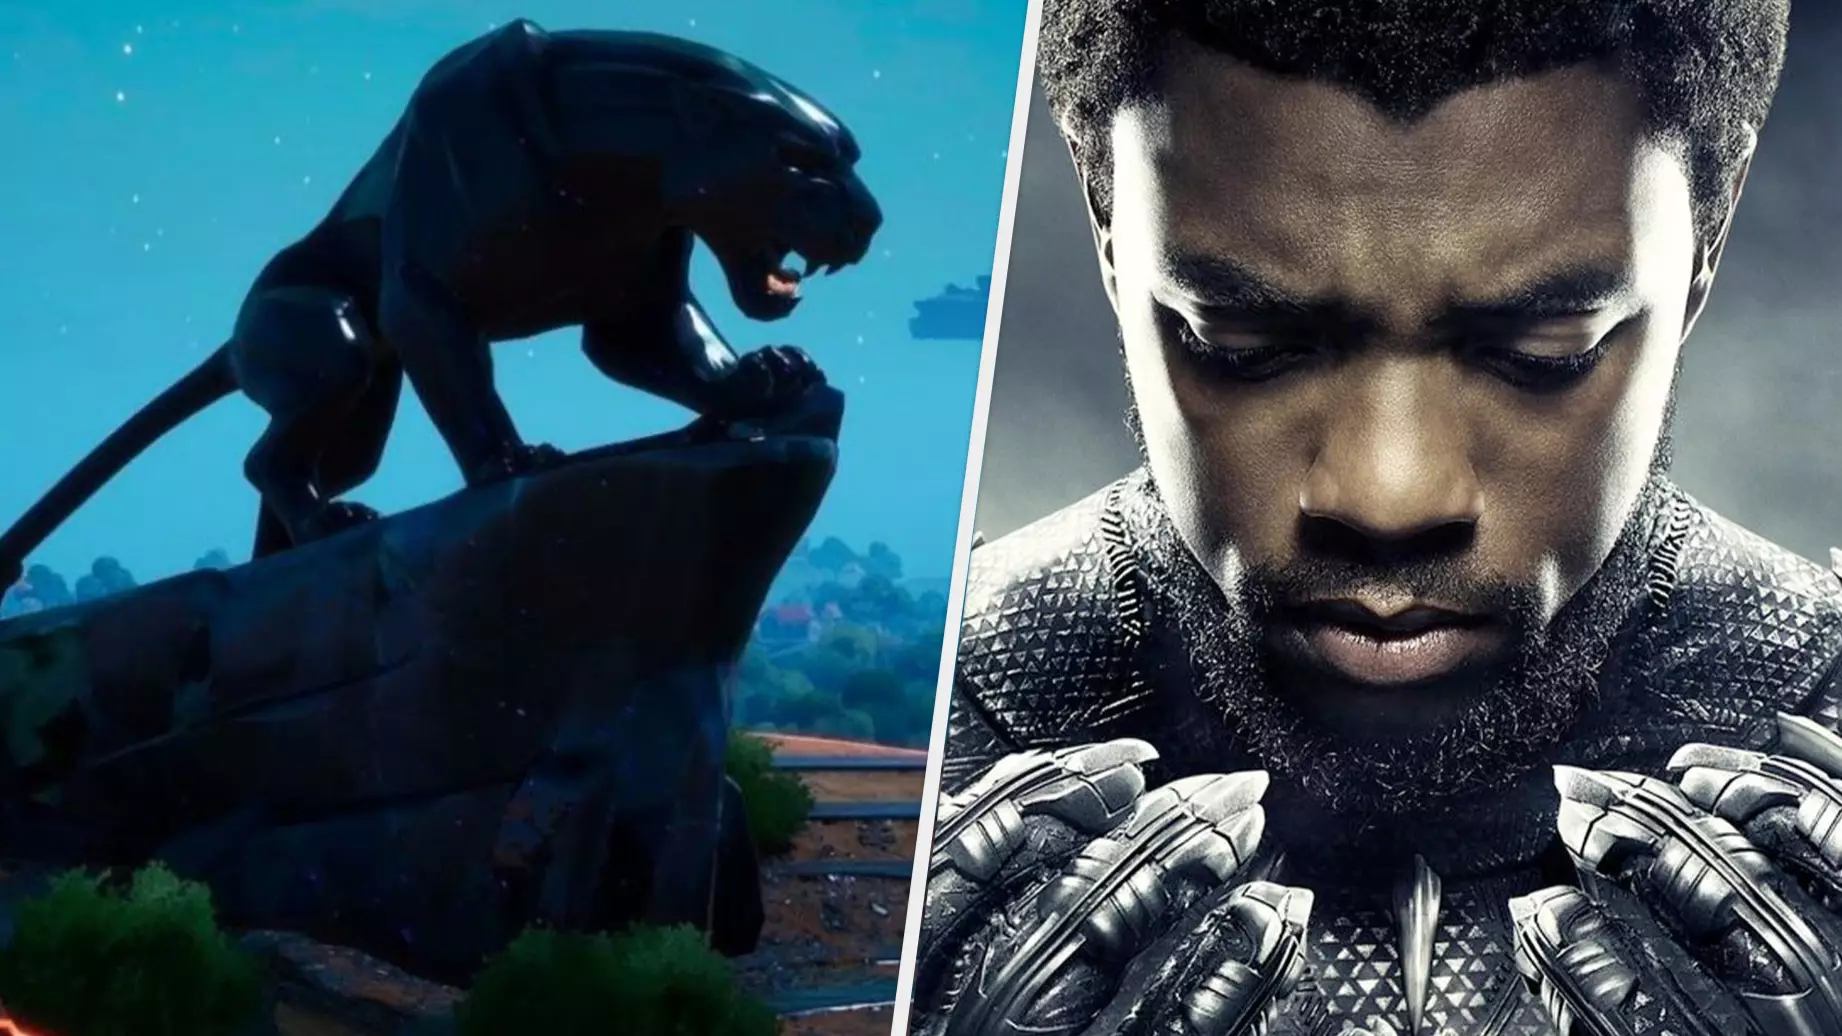 'Fortnite' Pays Tribute To Chadwick Boseman With Black Panther Statue